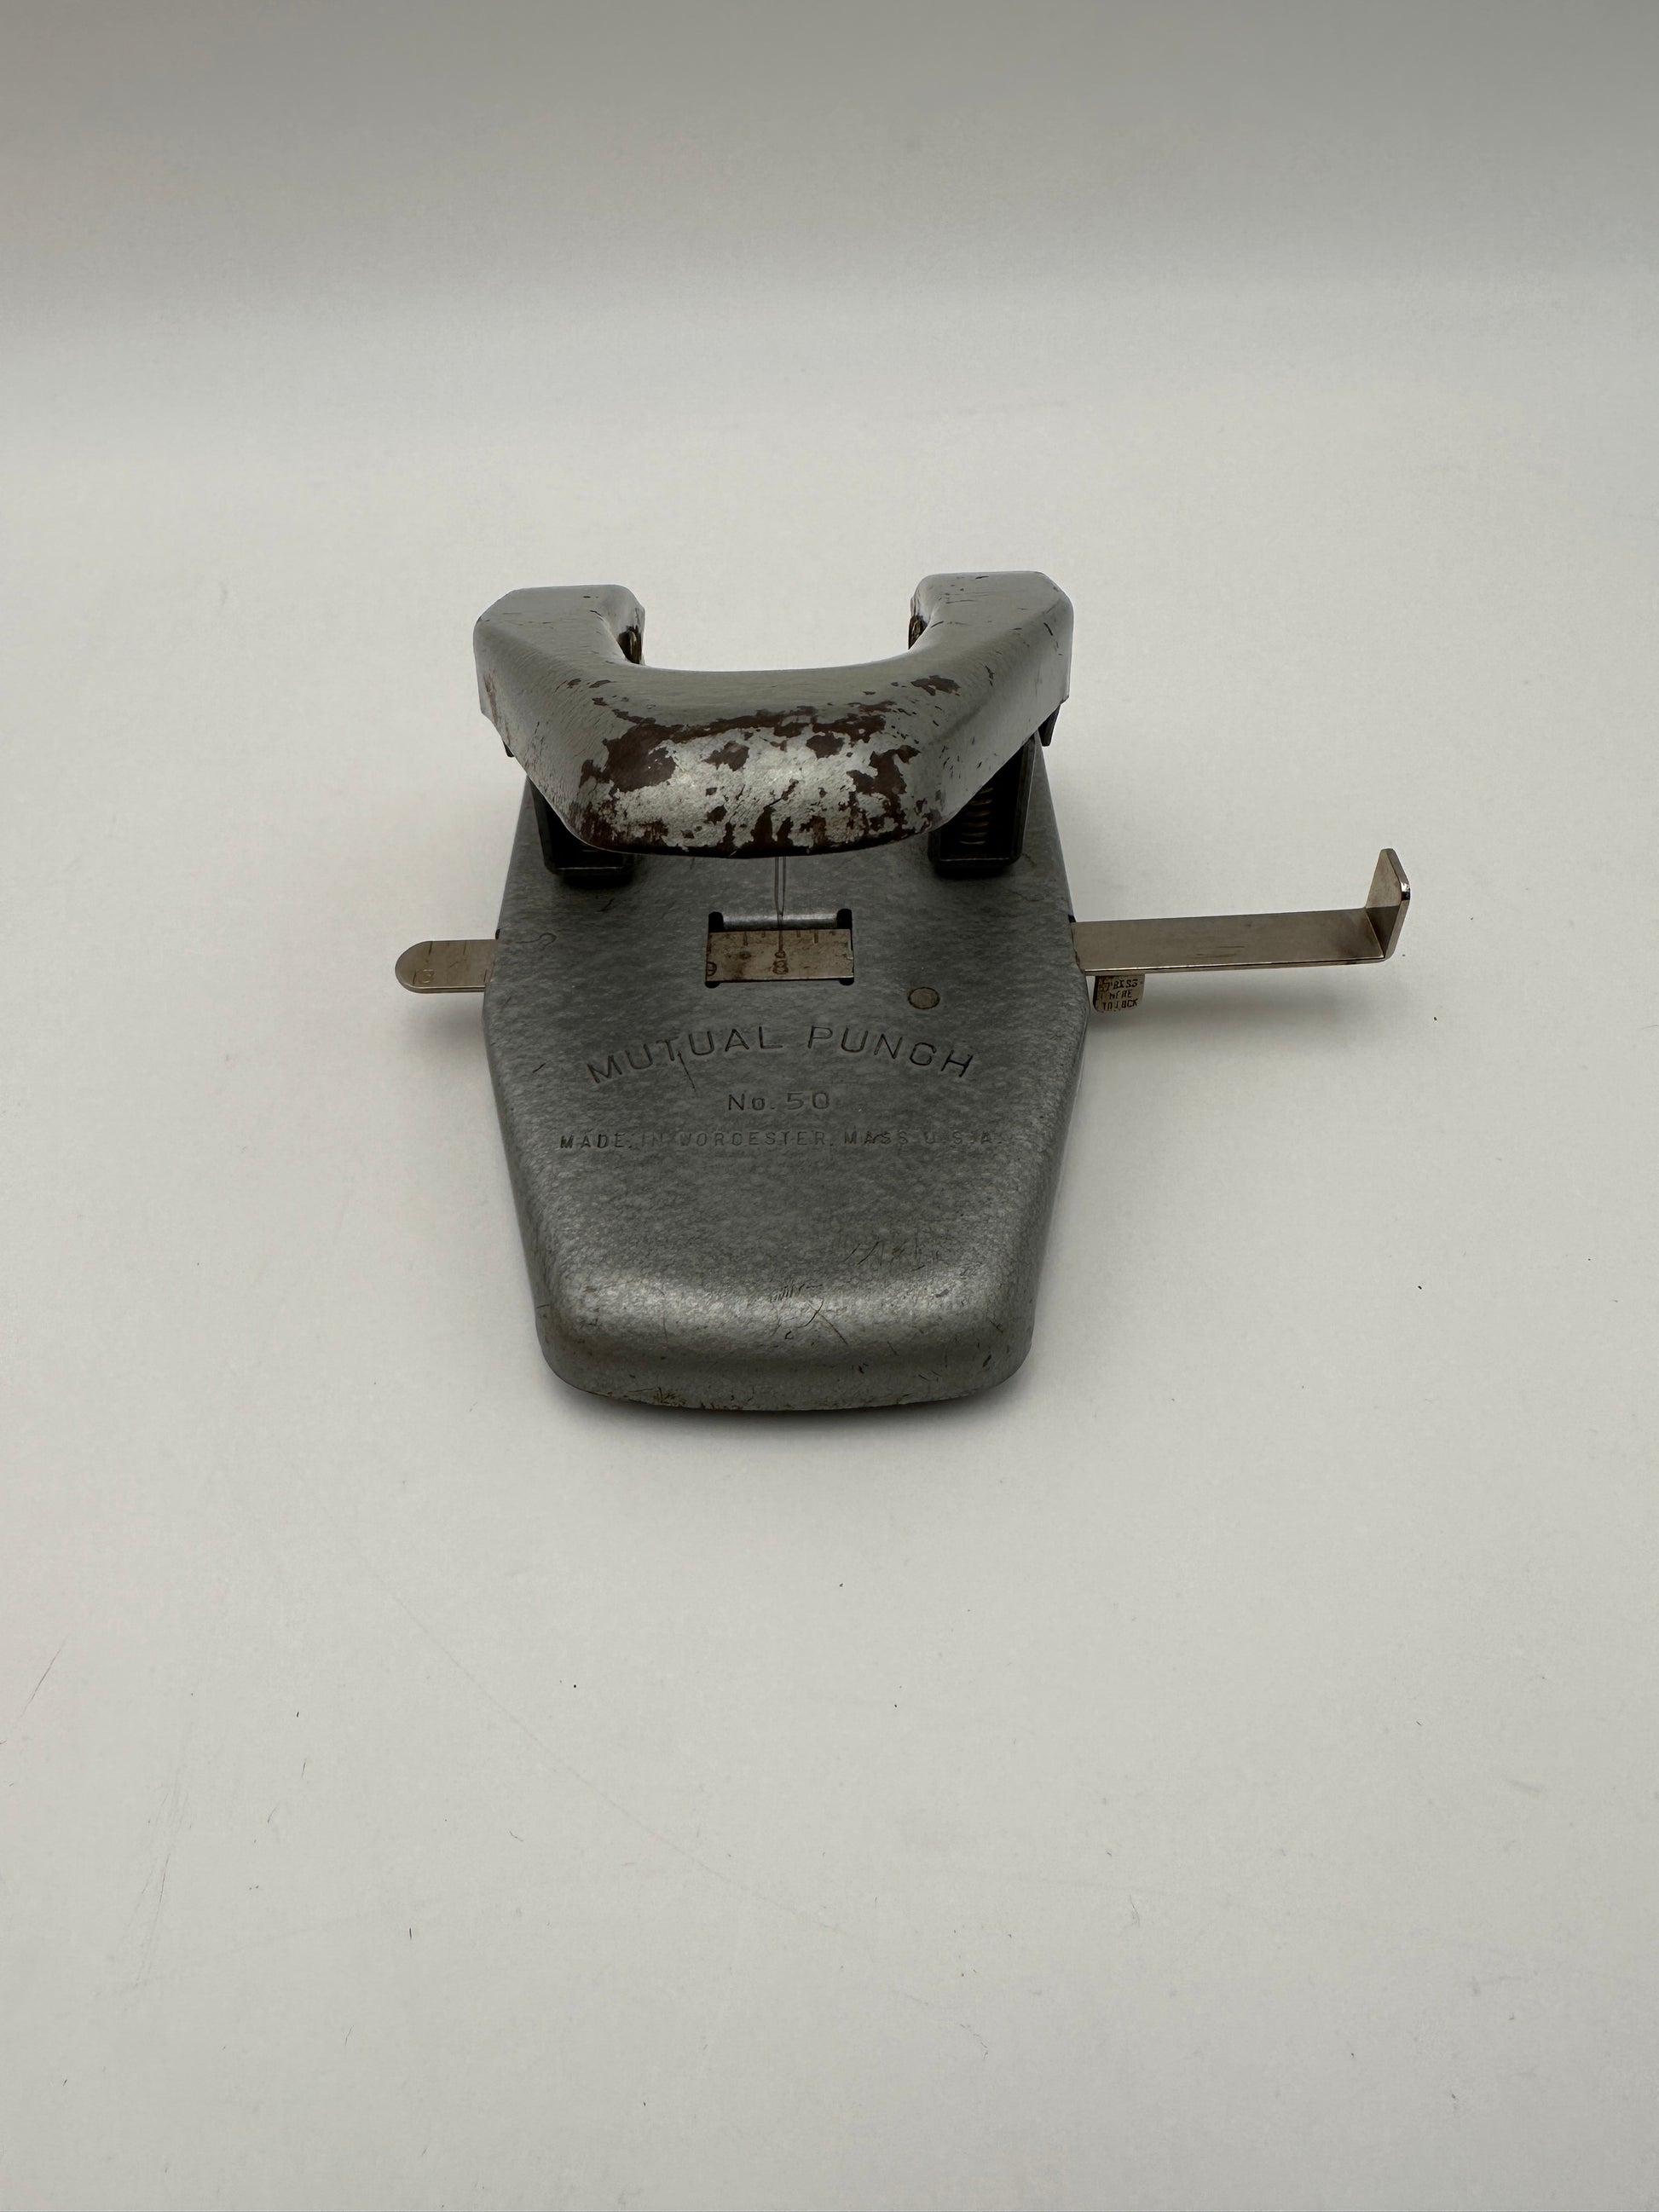 Vintage ACCO Mutual 50 Two Hole Punch 2 Hole Punch.